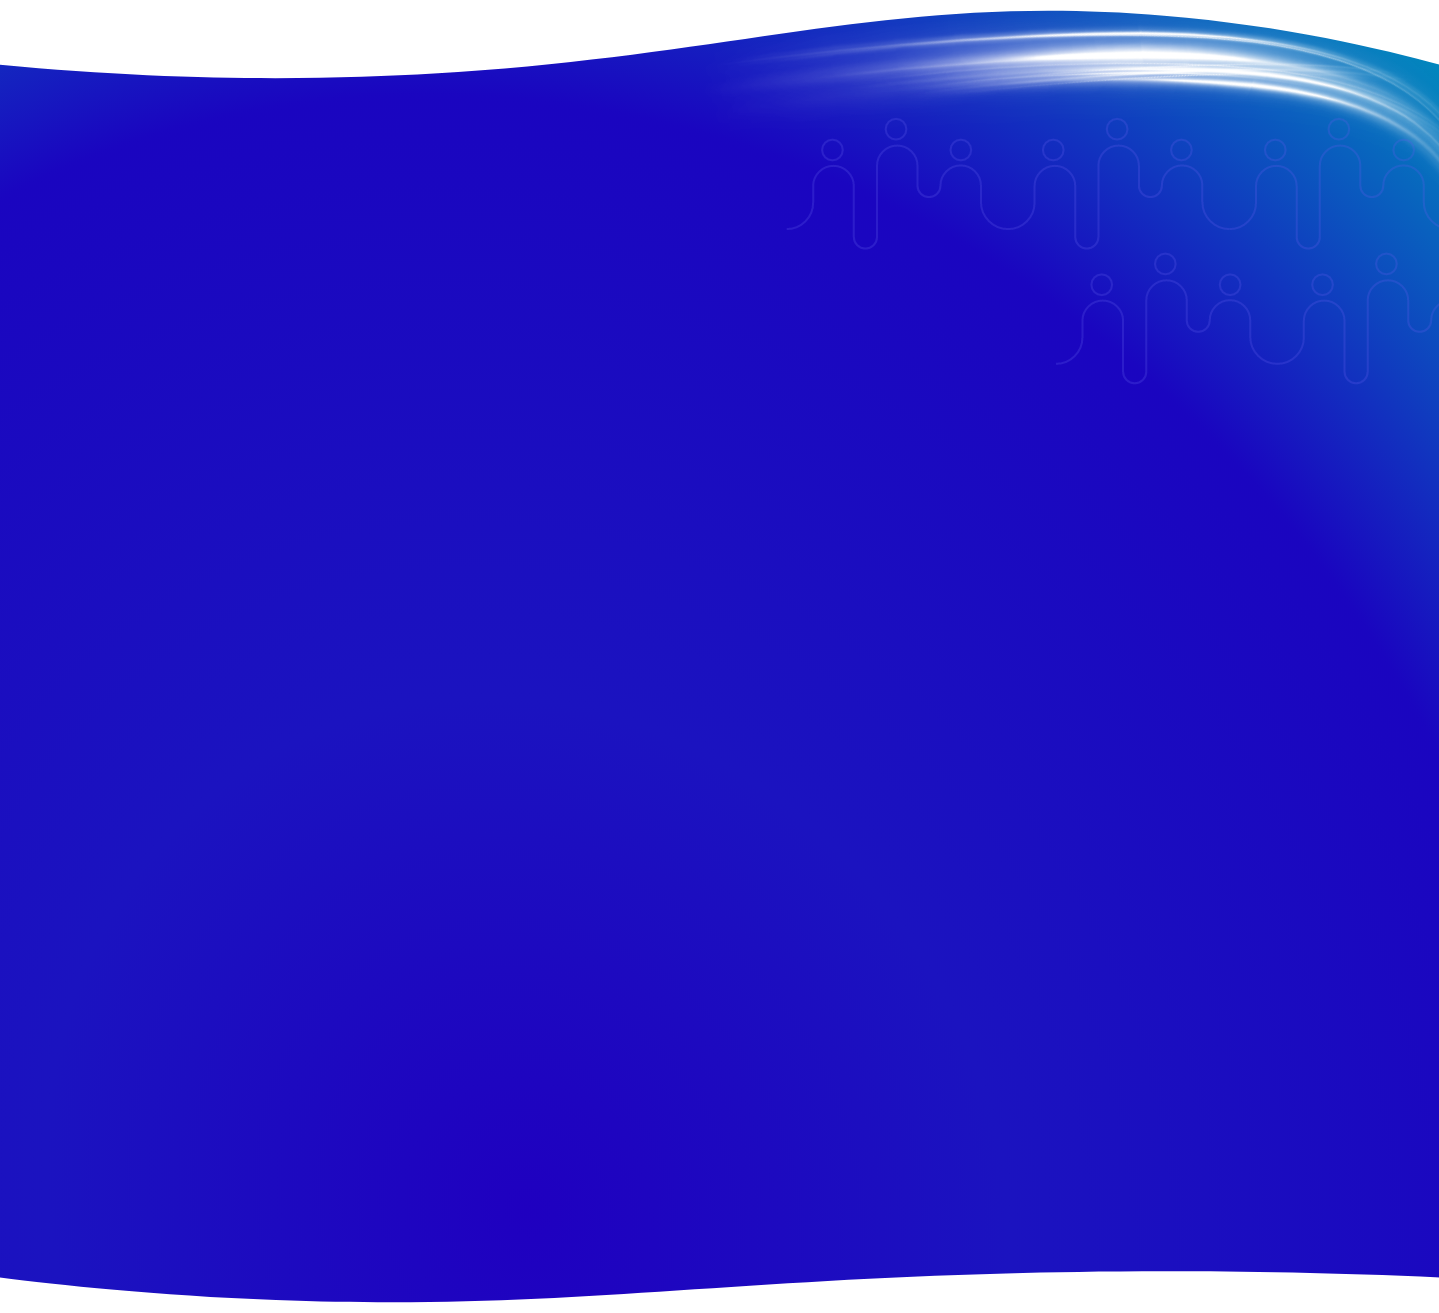 A gradient blue background with a white, curved, light trail.